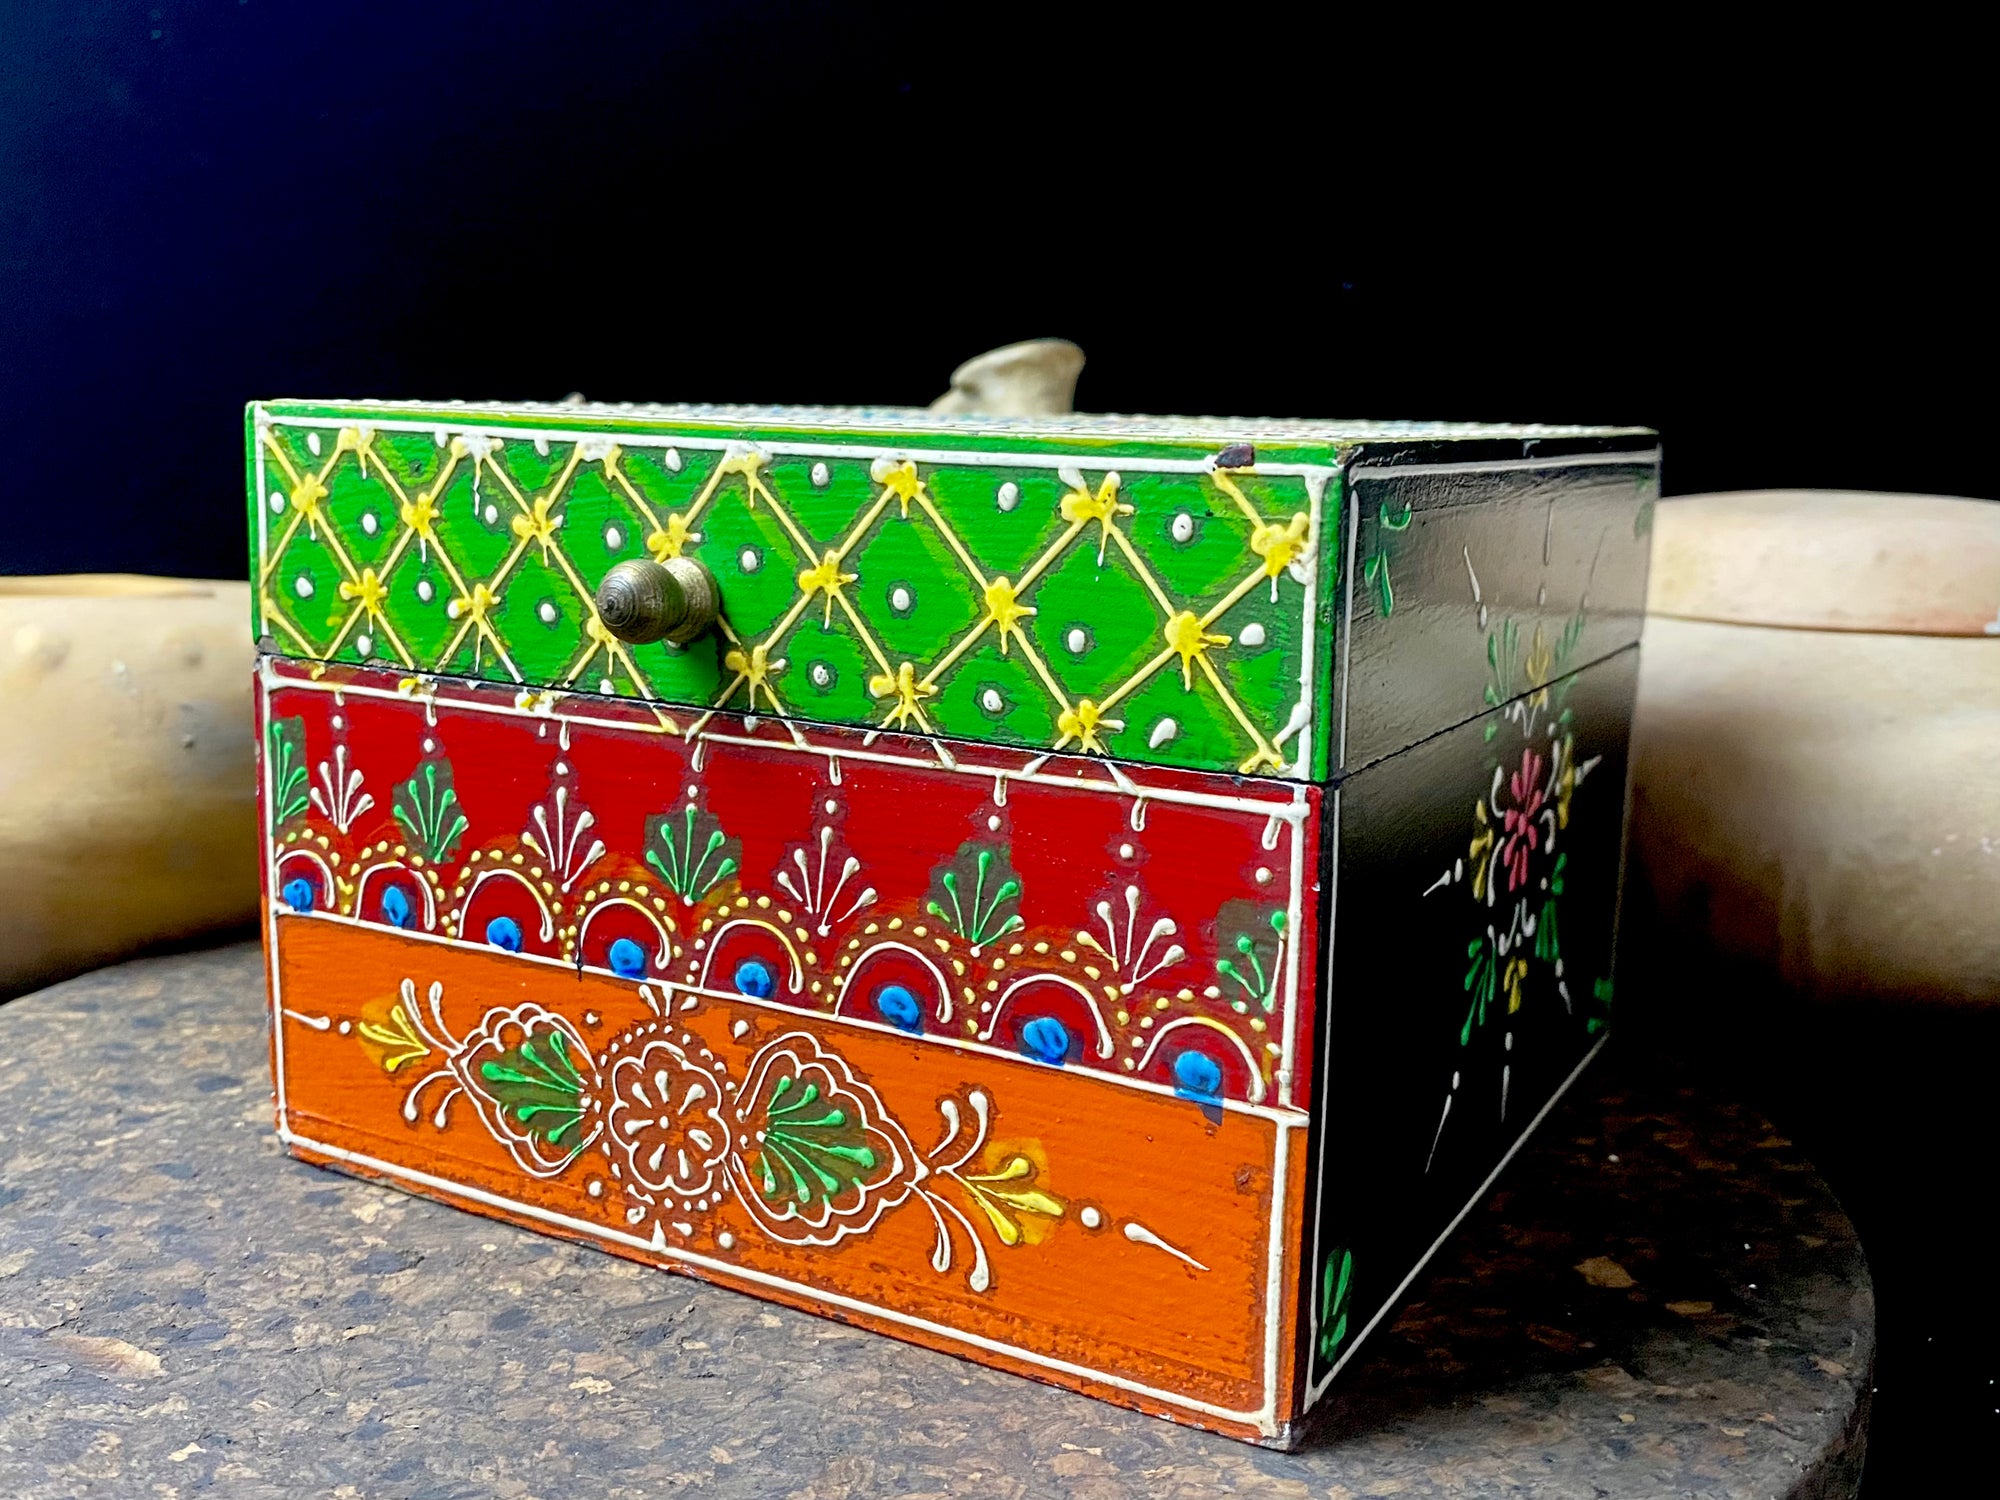 Vibrant hand painted trinket box. Small brass knob as handle. Perfect little boxes to keep your trinkets in. Great box to hold your essential oils or jewellery. From Rajasthan, India. Measurements: 15 x 15 cm, height 10.5 cm